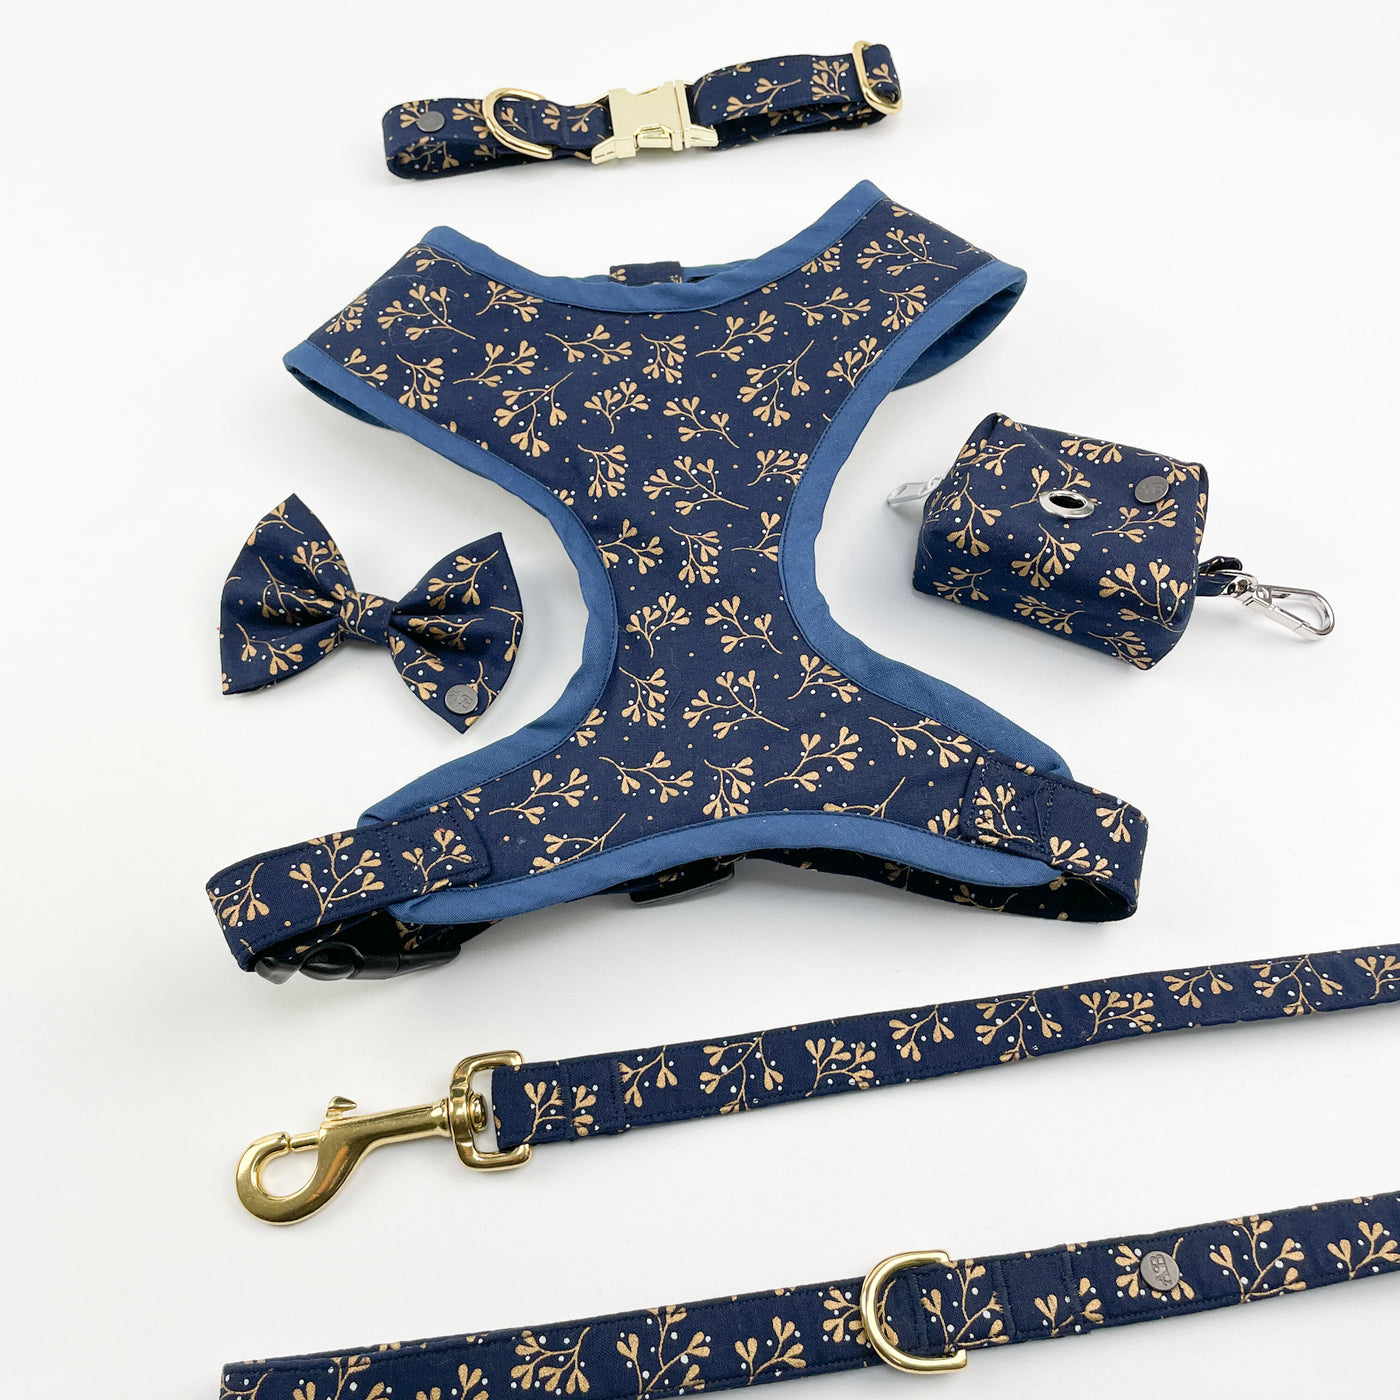 Navy Mistletoe soft dog harness, with matching dog collar, poop bag holder, collar and lead